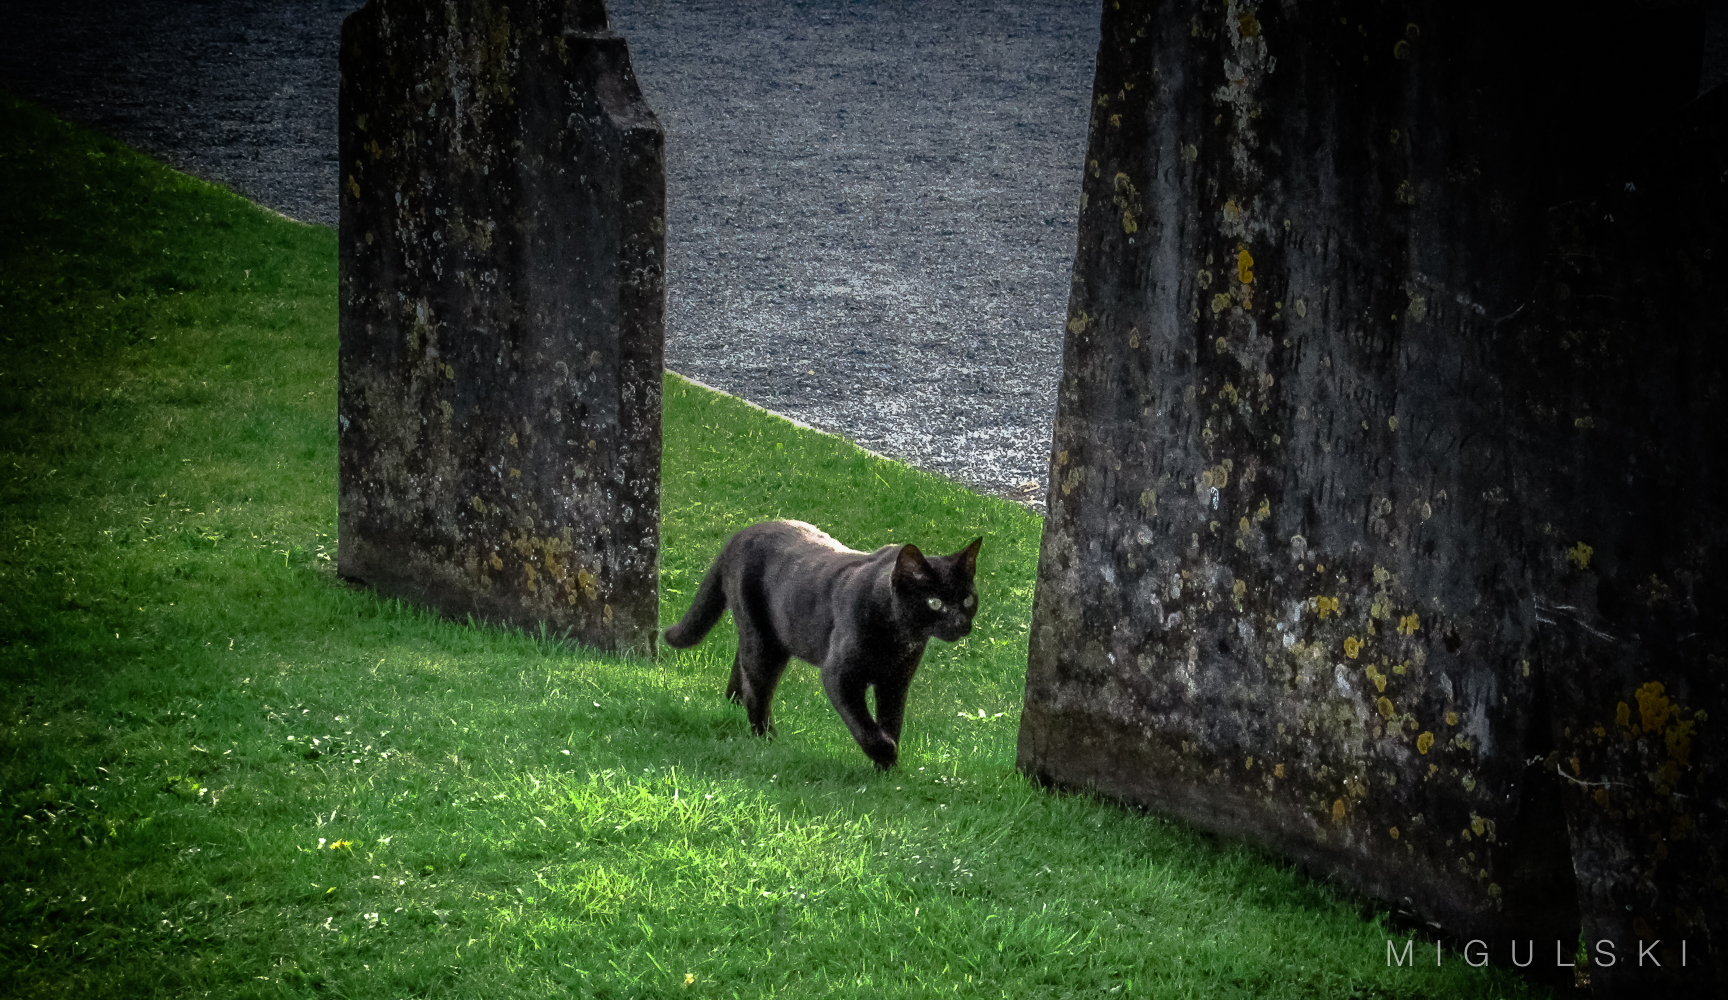 Black Cat in the Cemetery of St. Canice’s Cathedral